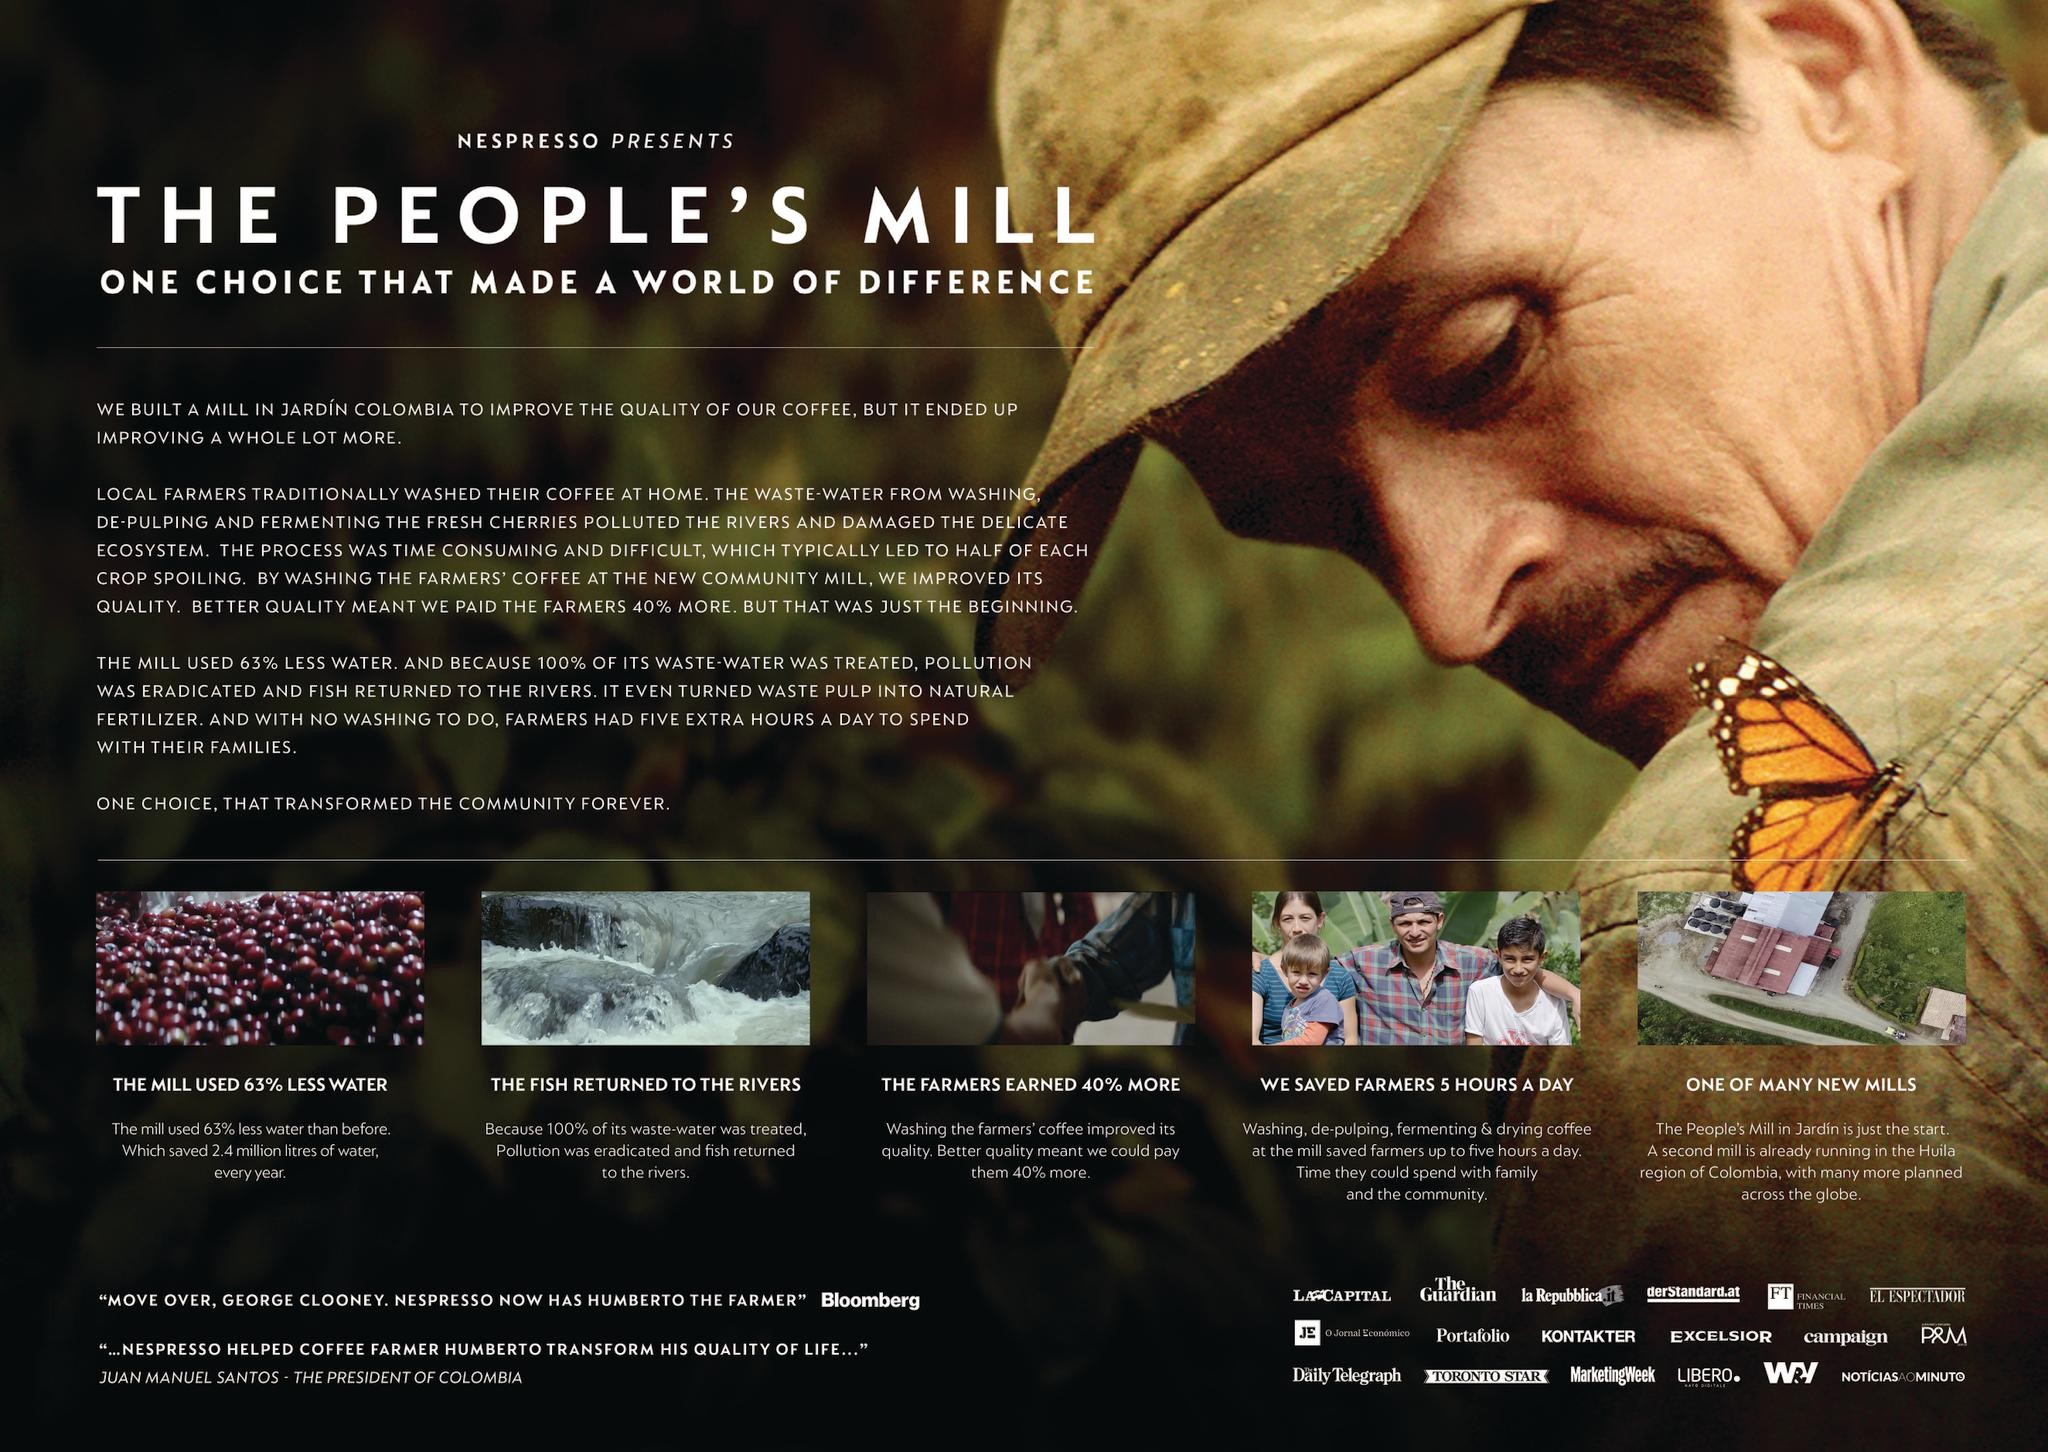 The People's Mill